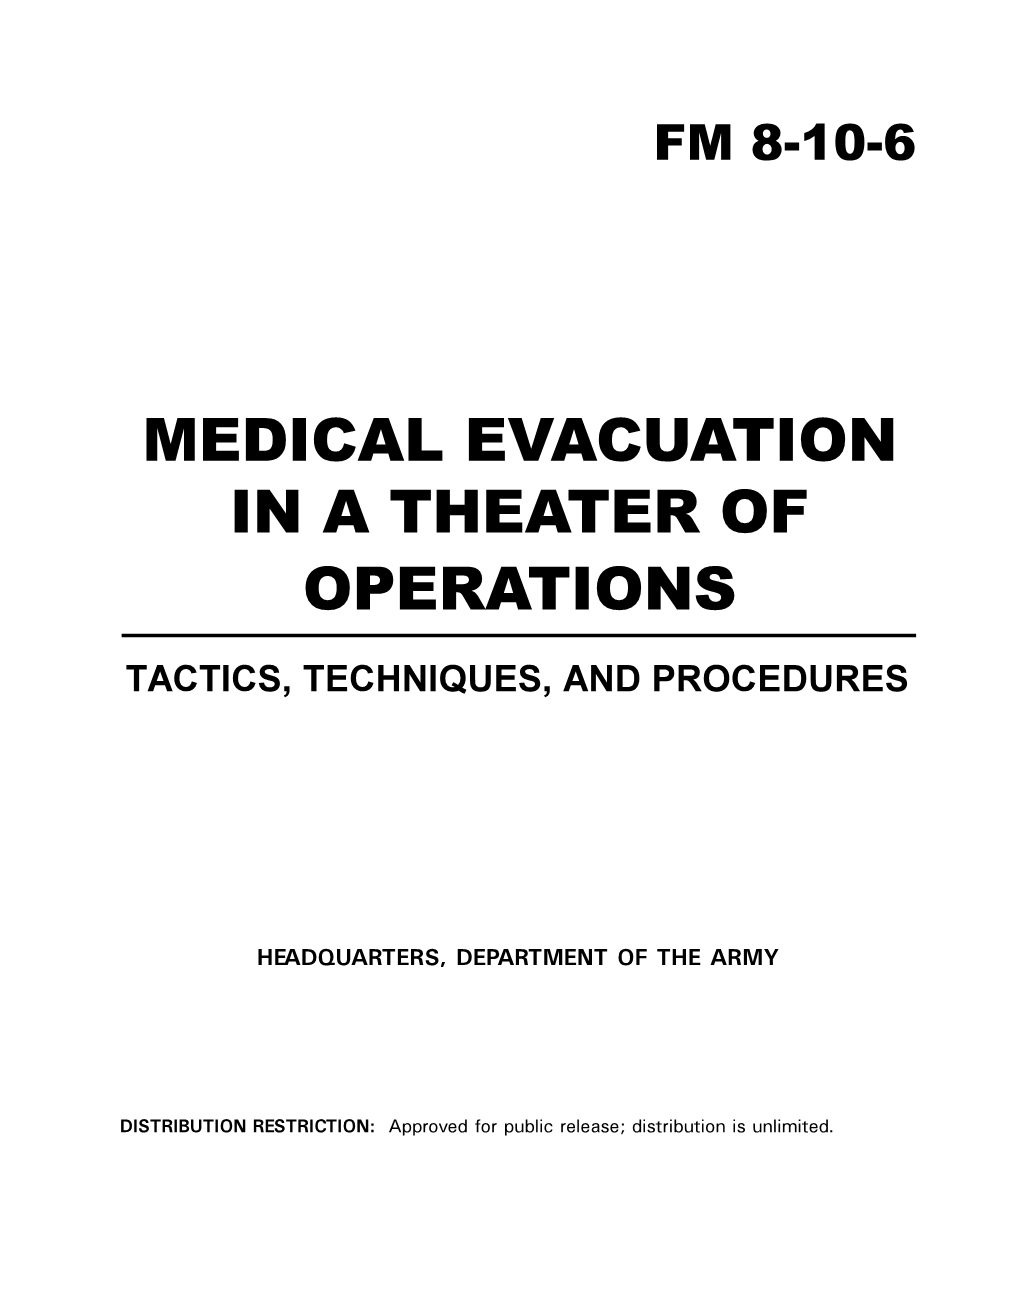 Medical Evacuation in a Theater of Operations